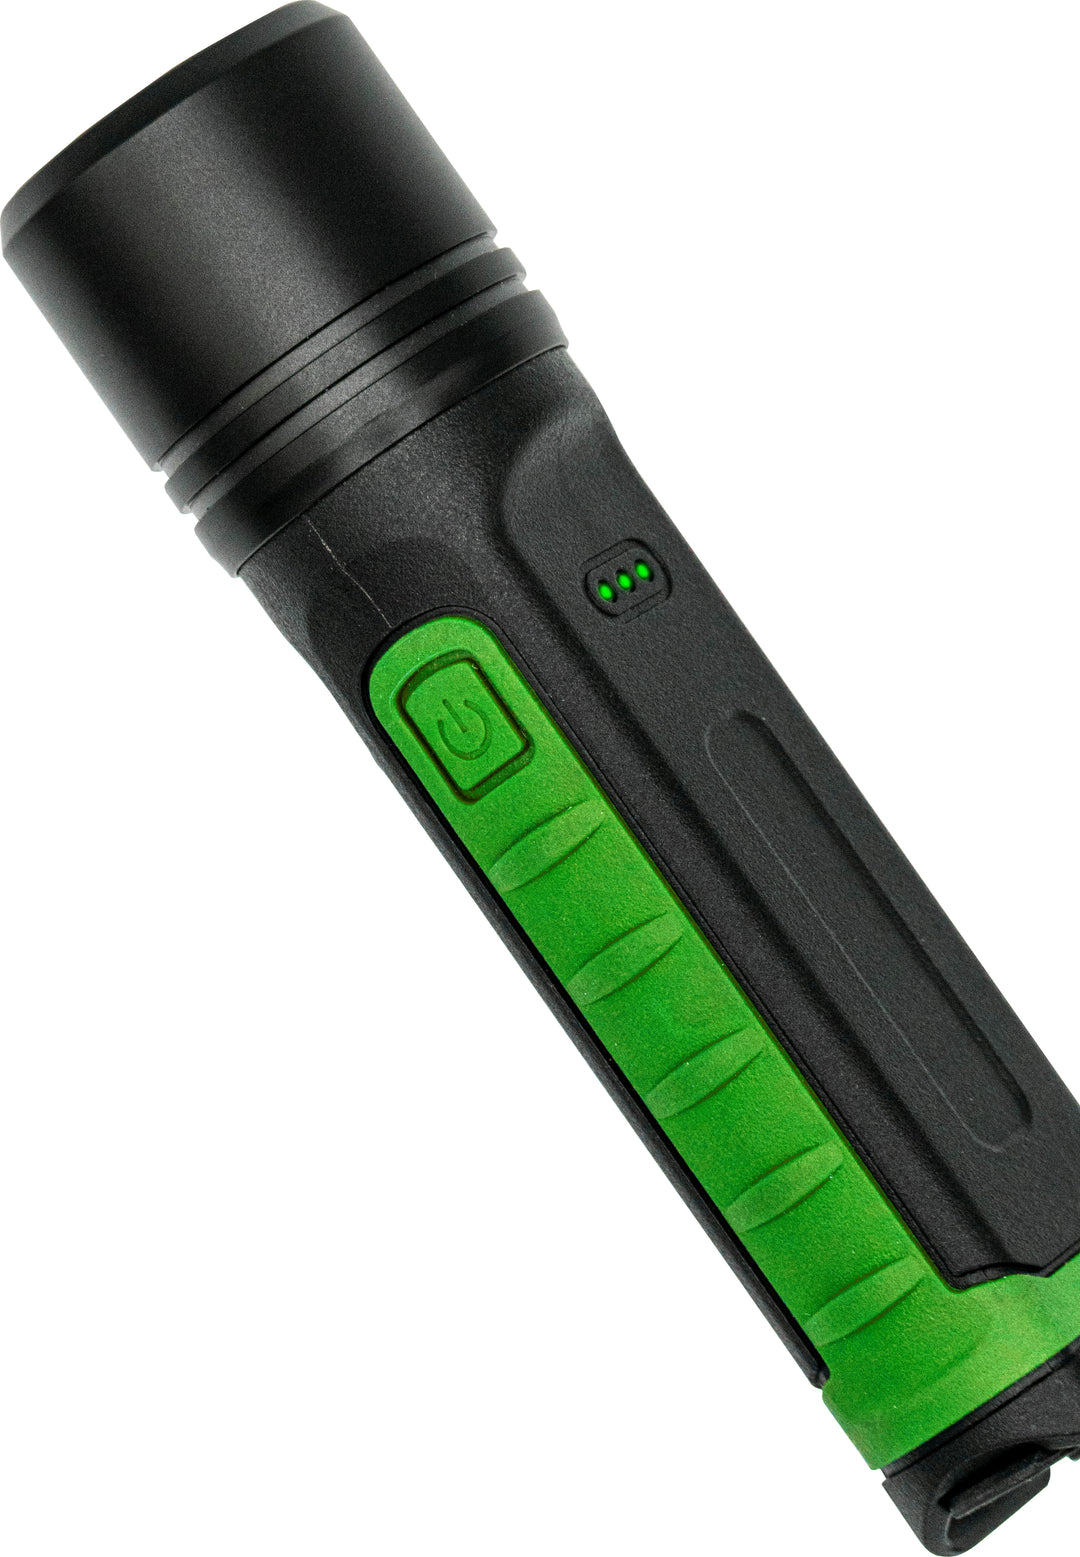 BOXO 1000 Lm Wireless Rechargeable Torch - Green